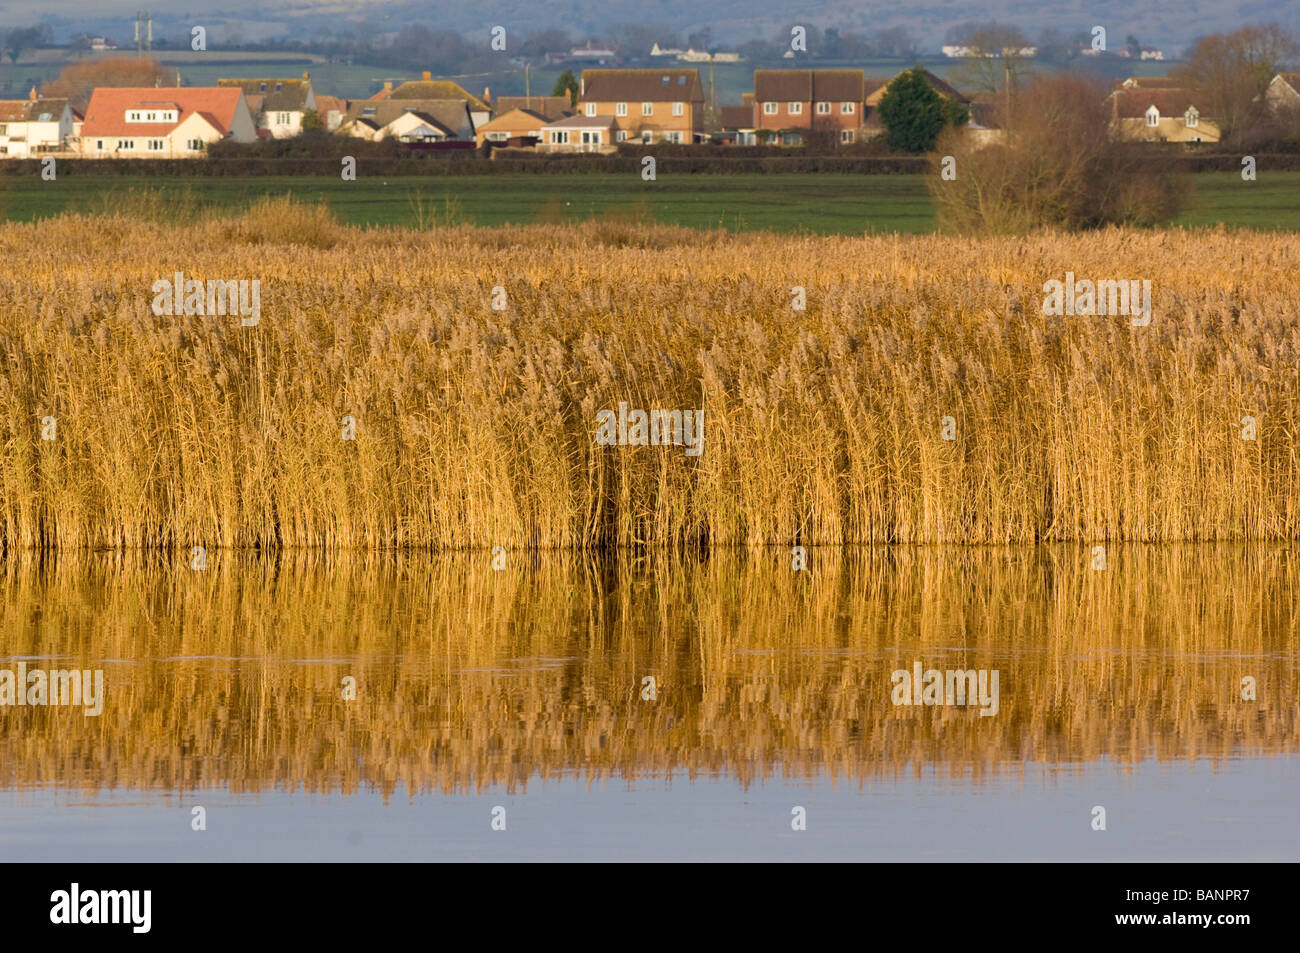 Phragmites reedbeds at Shapwick Heath nature reserve, on the Somerset Levels or Sedgemoor, with the village of Westhay nearby. Stock Photo